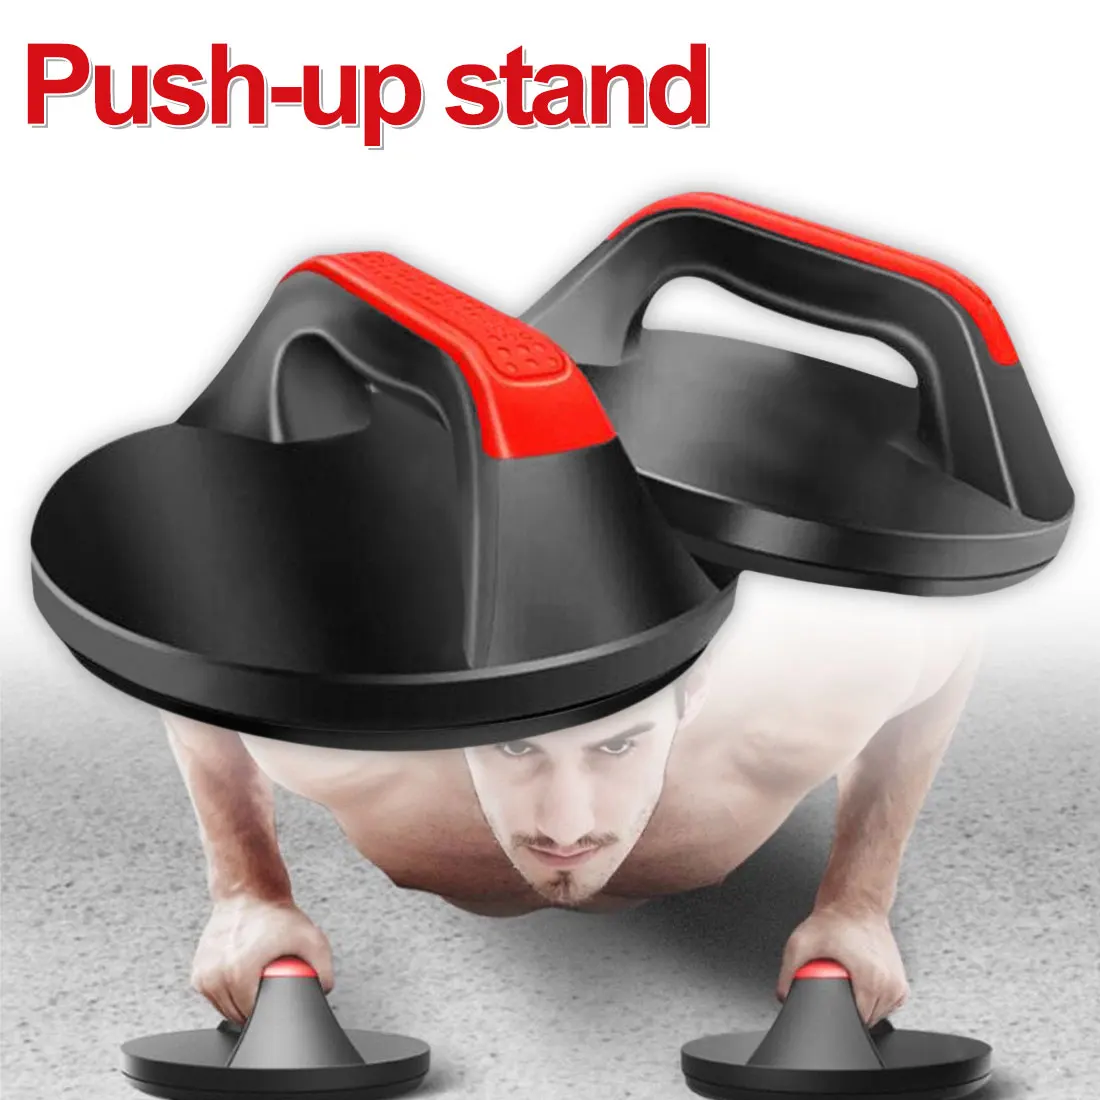 

High Quality 1 Pair Push-up Stands Round Rotatable Push-ups Fitness Equipment Red and Black Body Building 360 Degrees Hot Sale